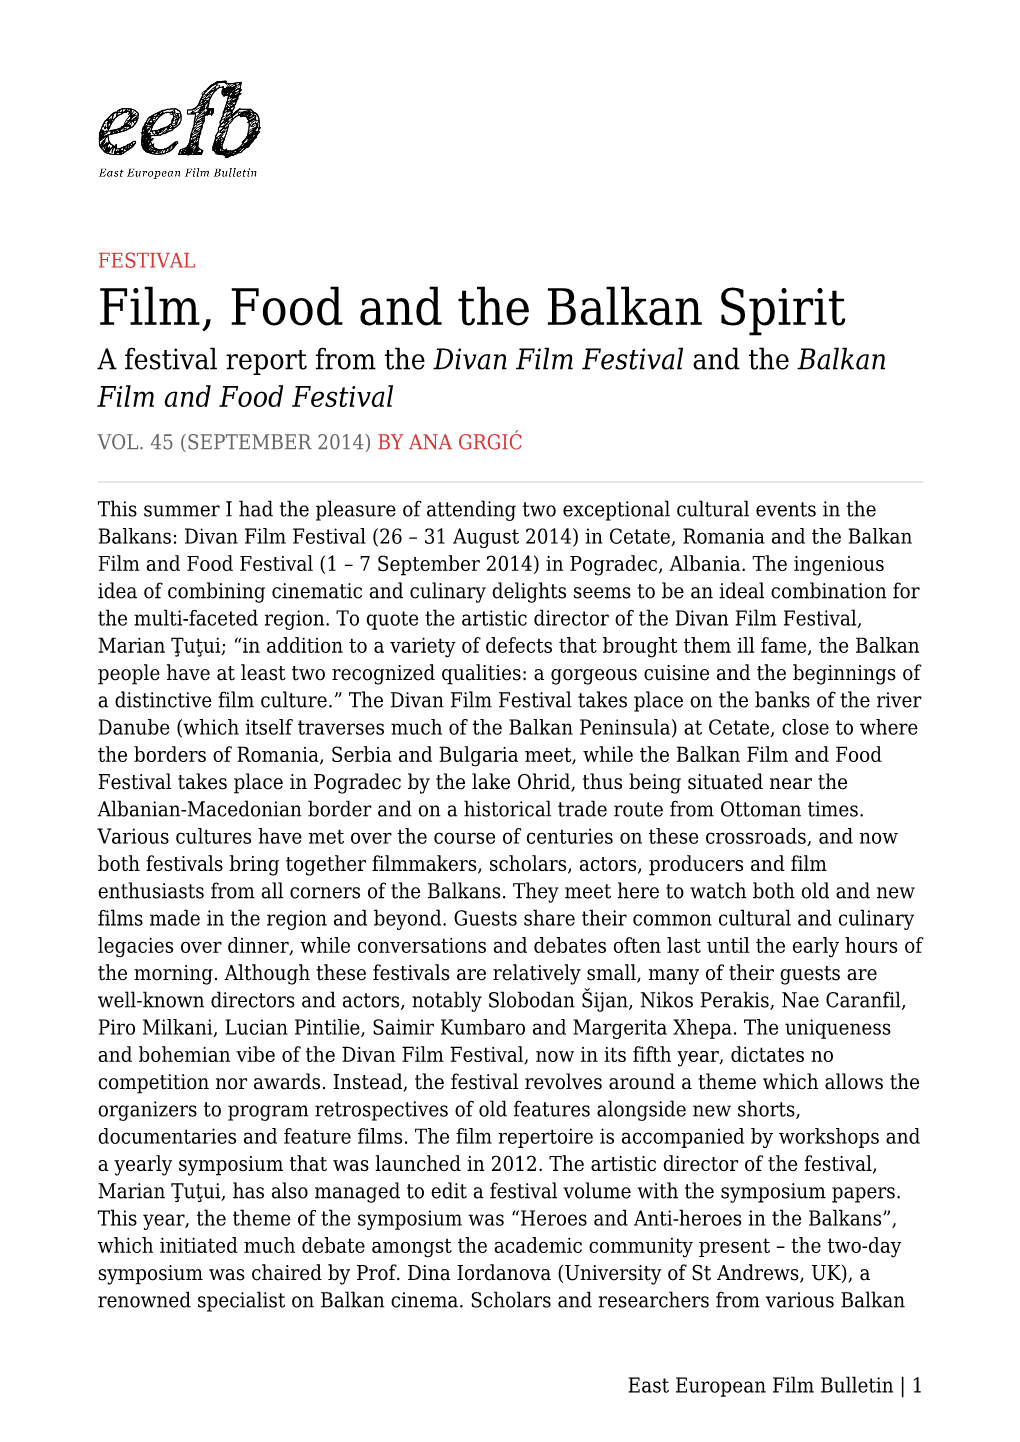 A Festival Report from the Divan Film Festival and the Balkan Film and Food Festival VOL